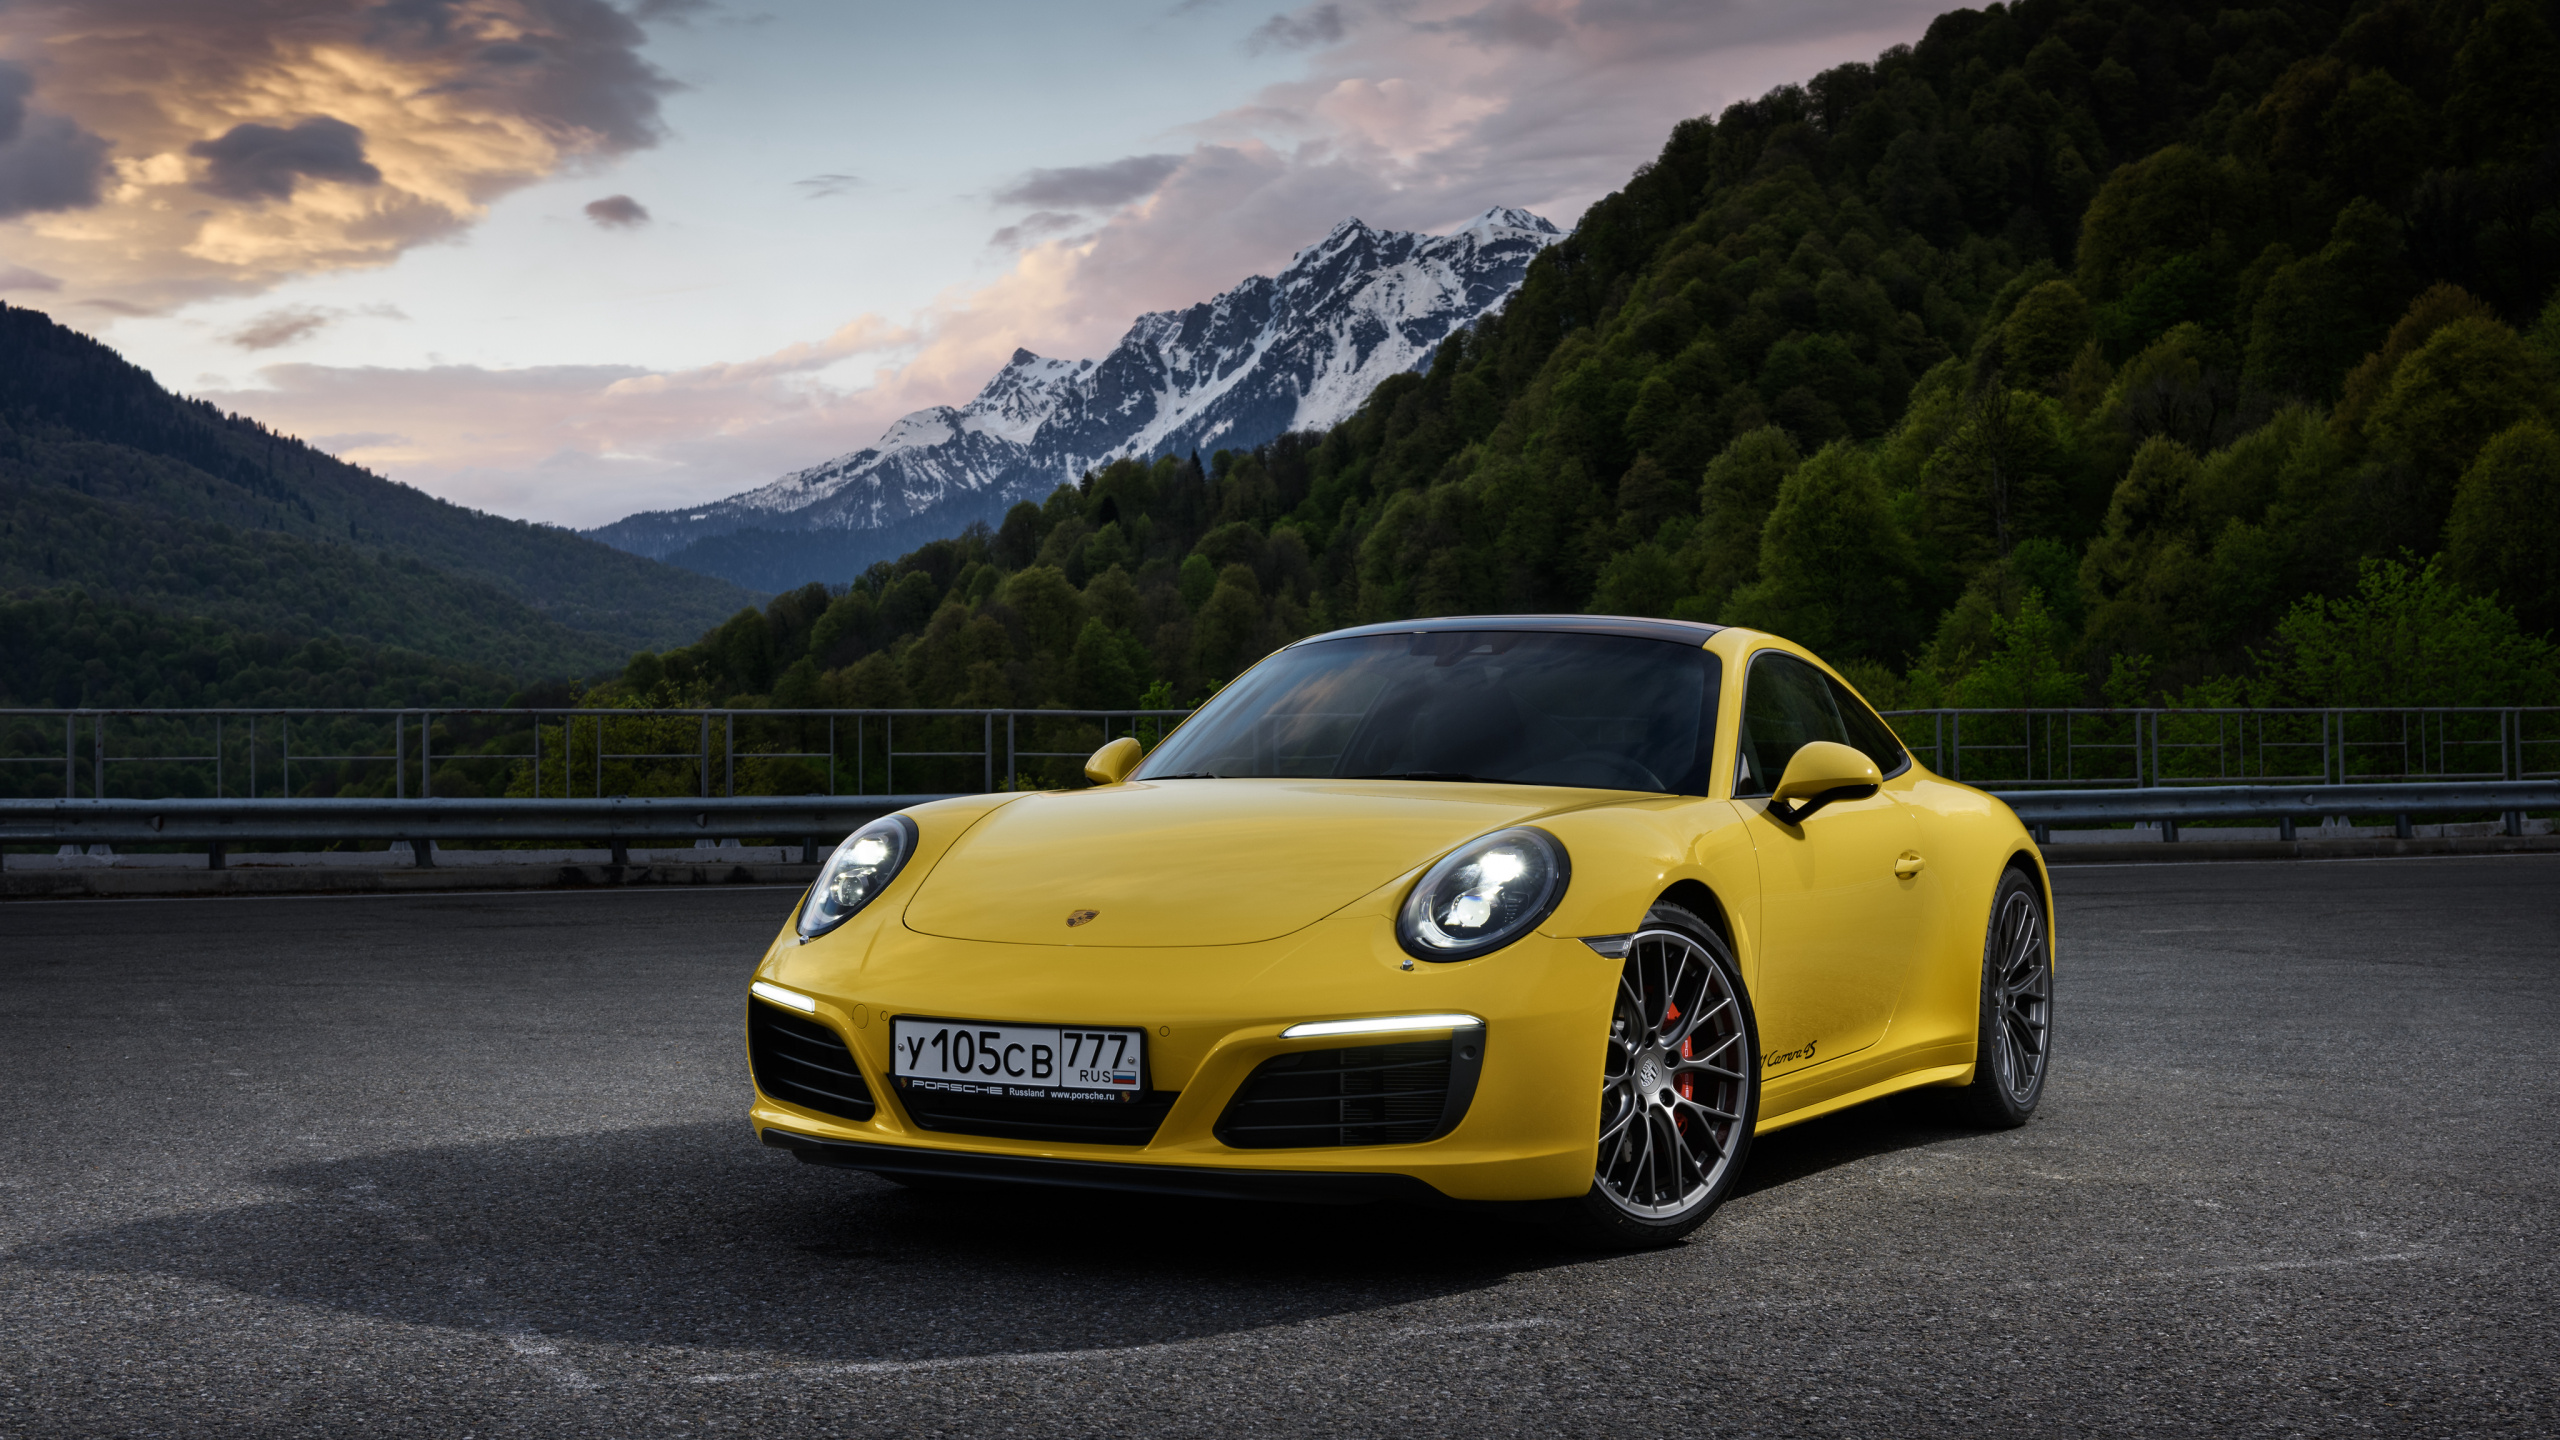 Yellow Porsche 911 on Road Near Mountain During Daytime. Wallpaper in 2560x1440 Resolution